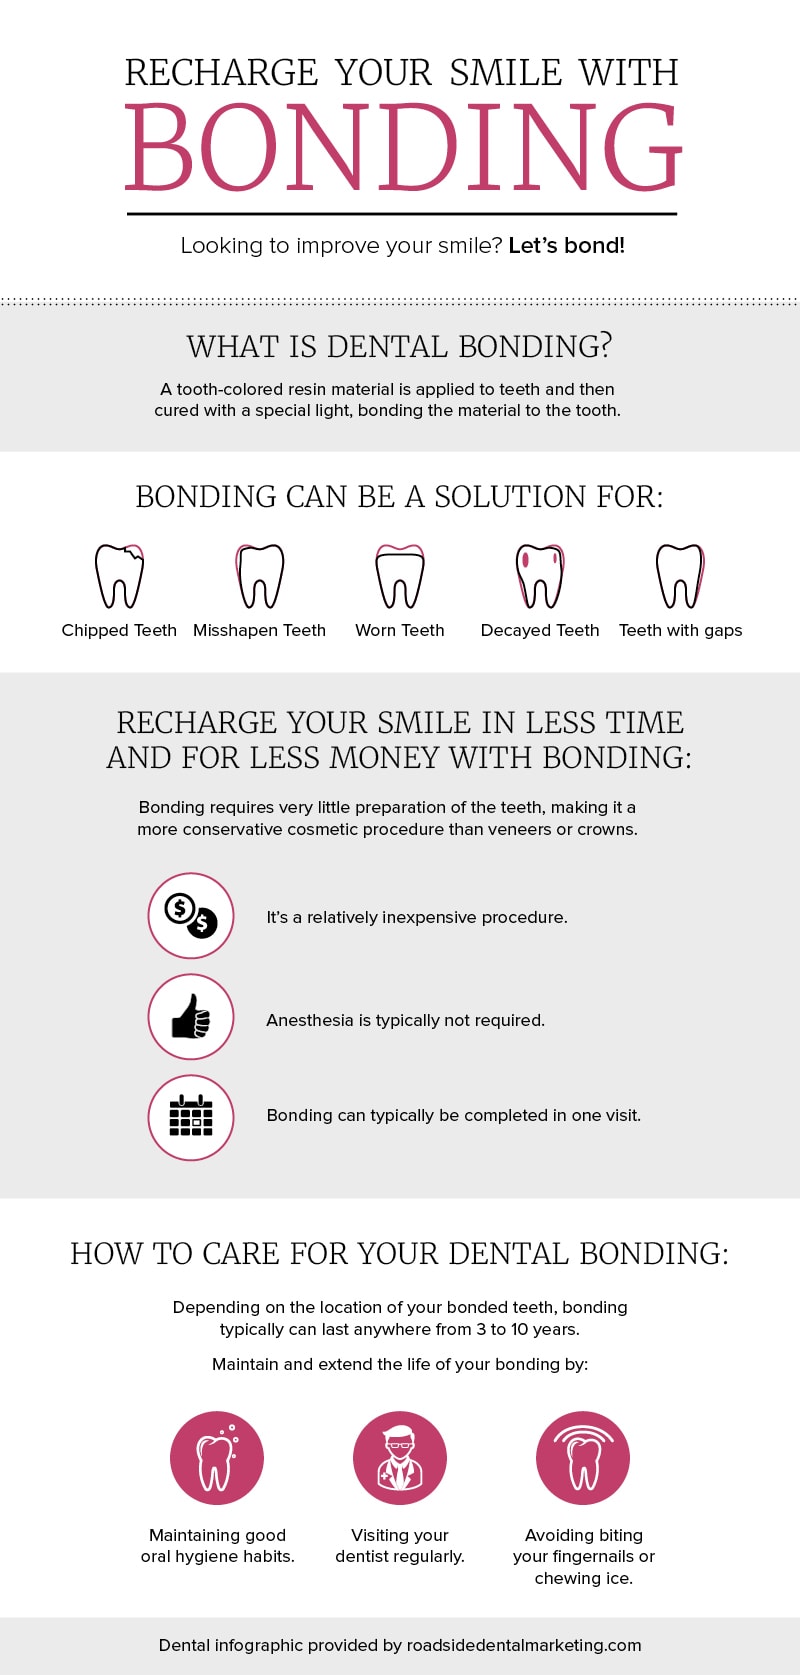 Dental infographic - Recharge your smile with dental bonding! 